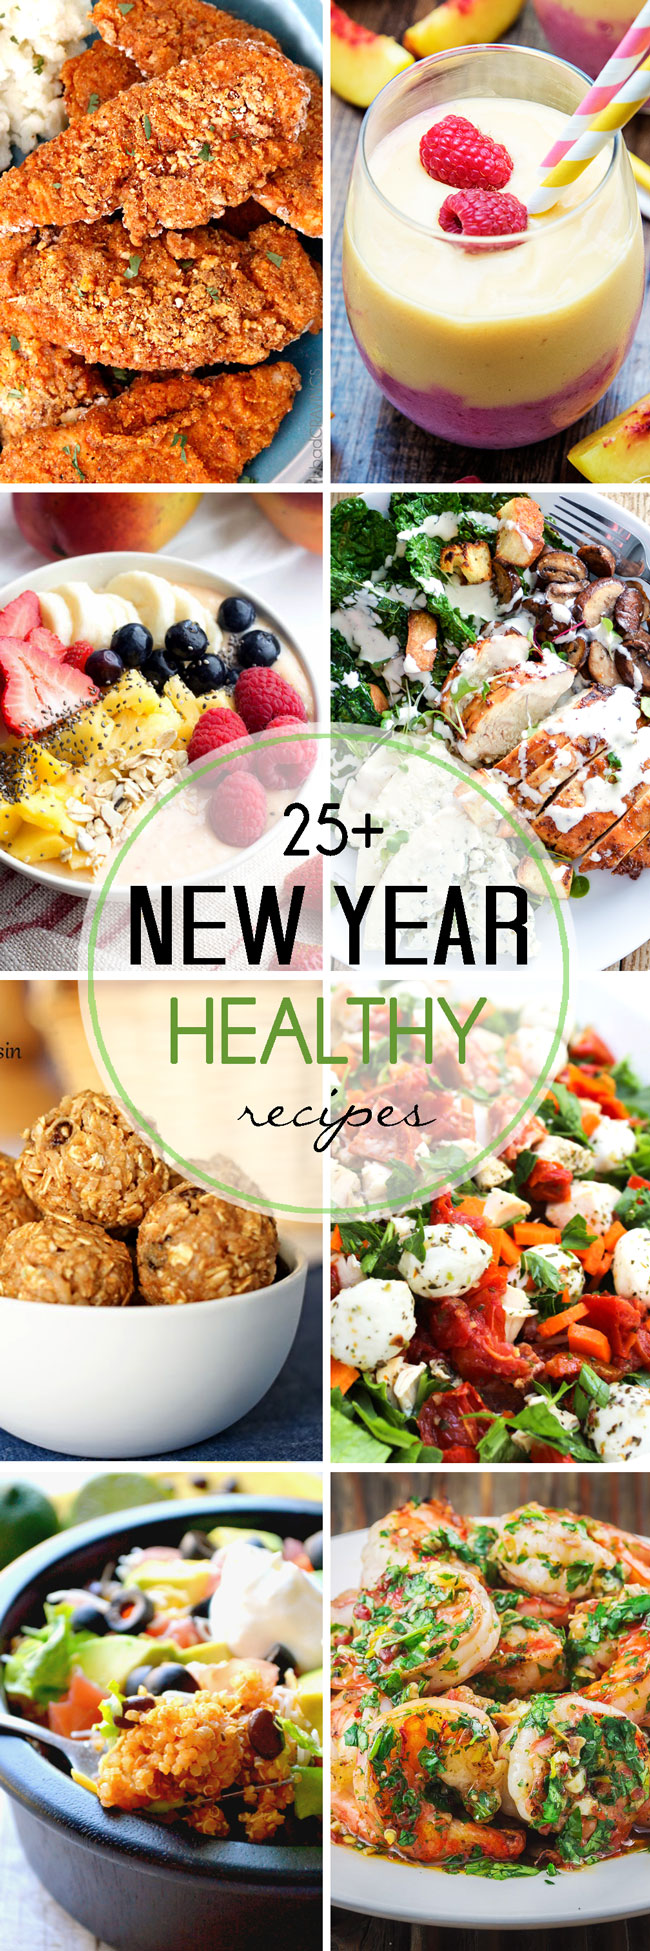 25+ Healthy Recipes for the New Year! Jump start a better diet after all the cookies and fudge over the holidays with these healthier ideas!  | The Love Nerds